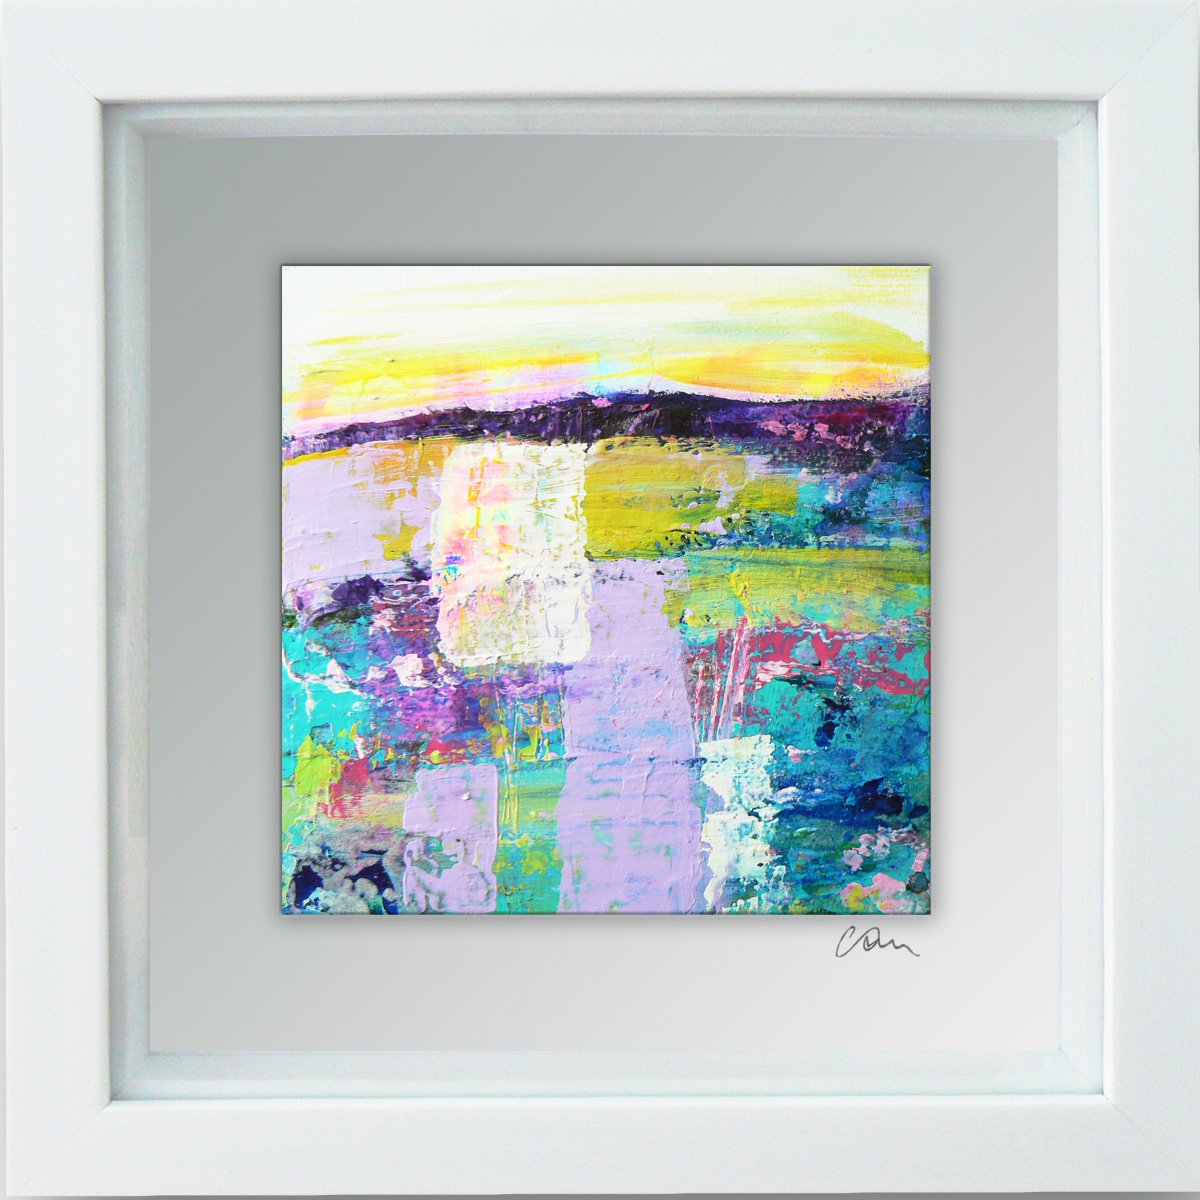 Framed ready to hang original abstract - abstract landscape #9 by Carolynne Coulson